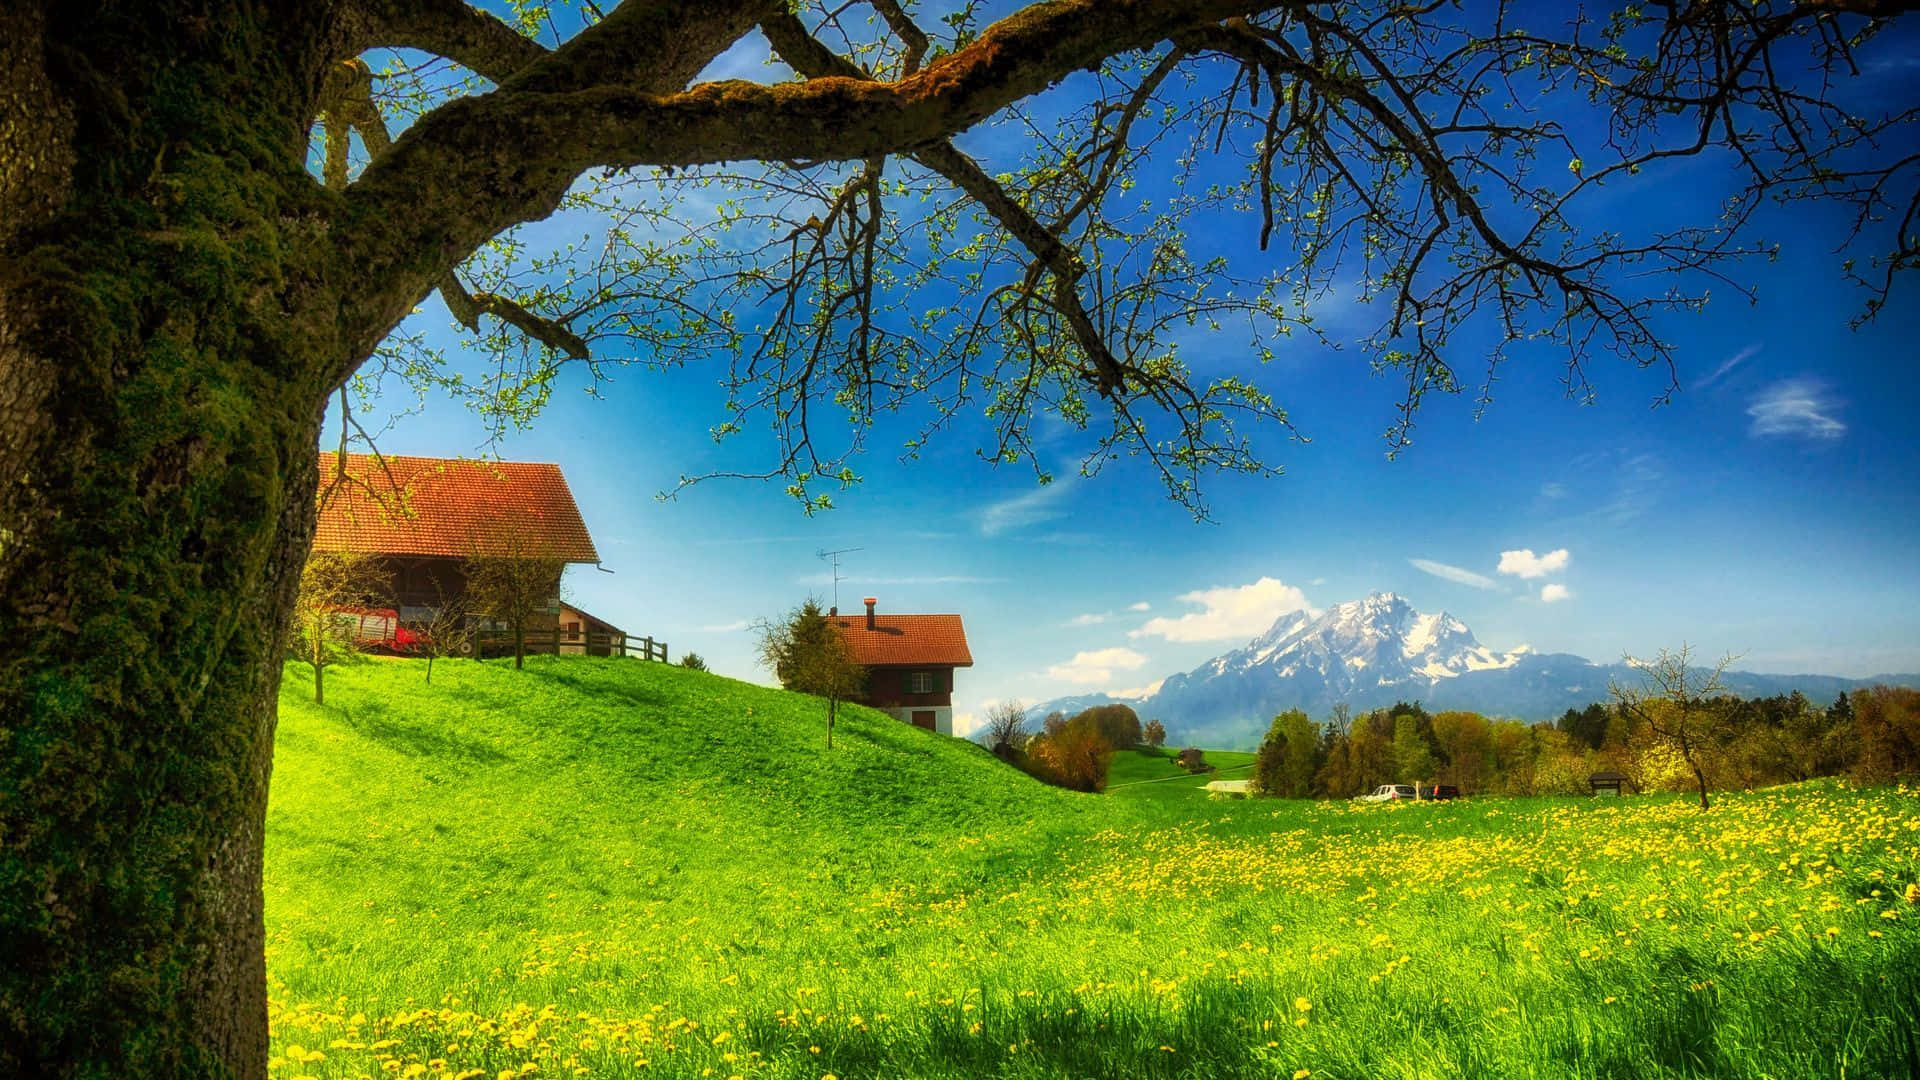 Enjoy a beautiful cloudy day in the countryside